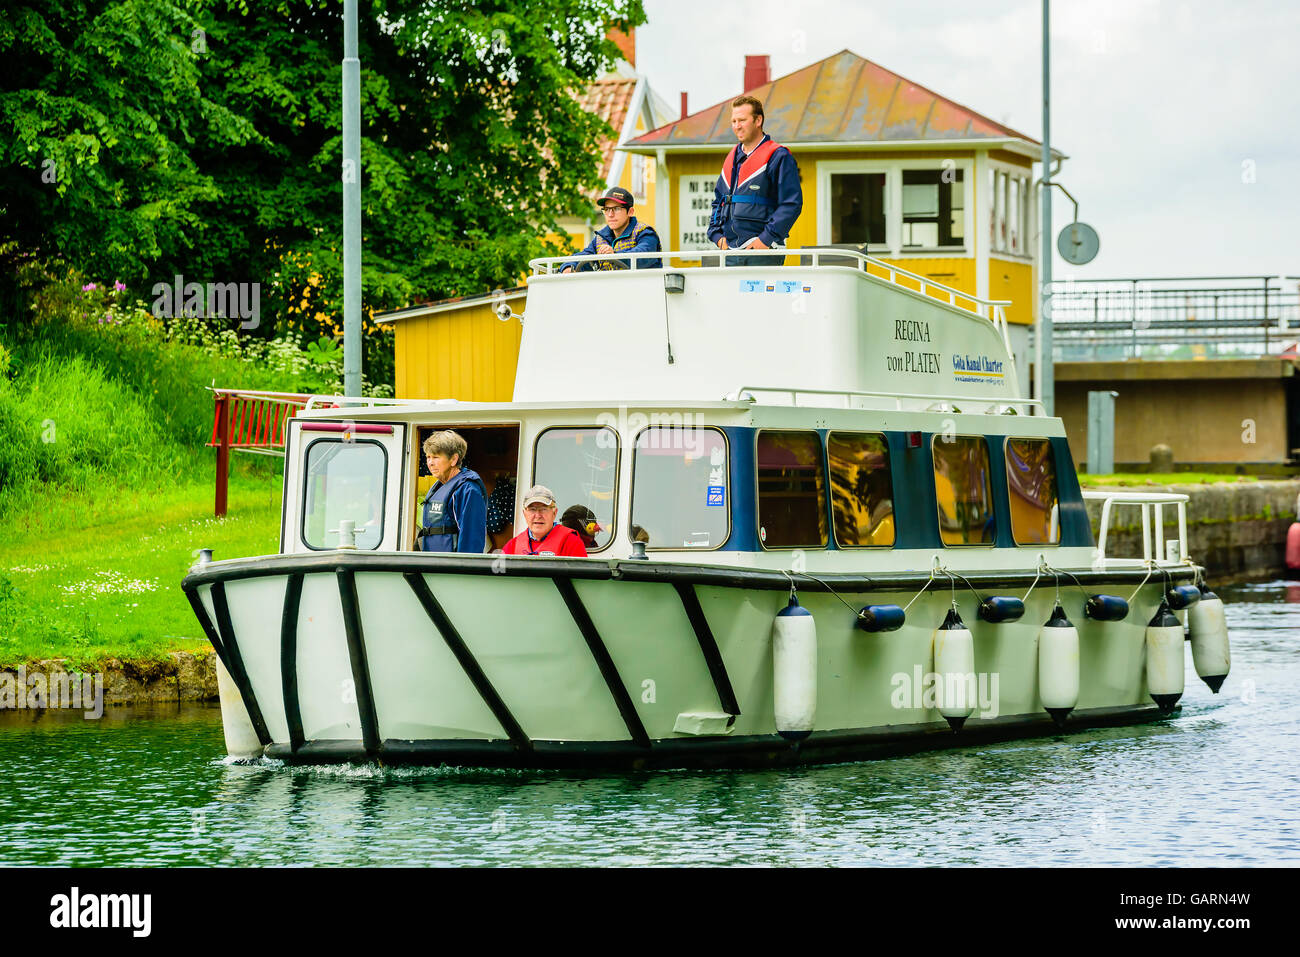 Motala, Sweden - June 21, 2016: People traveling with a chartered boat on the Gota canal. Real people in everyday life. Stock Photo